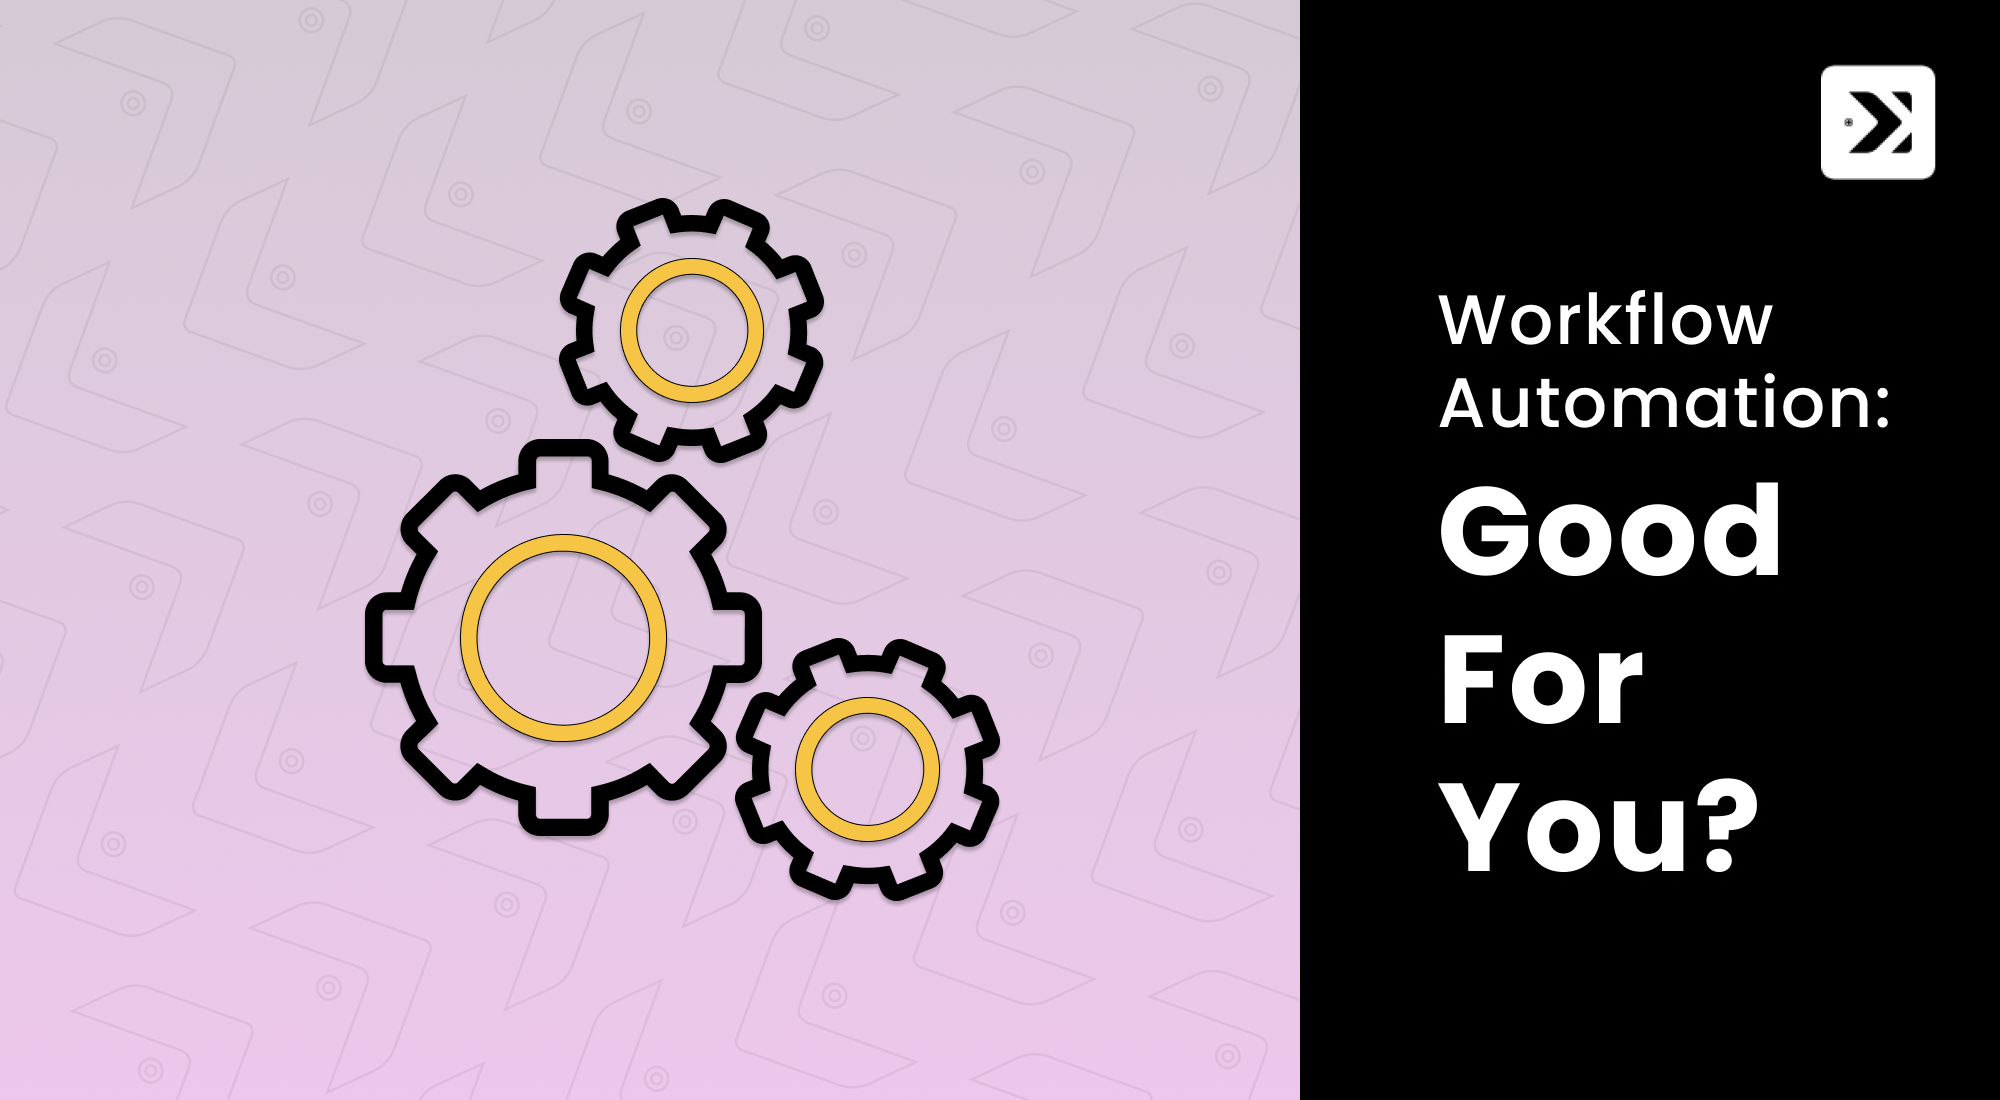 Workflow Automation: Good for You?